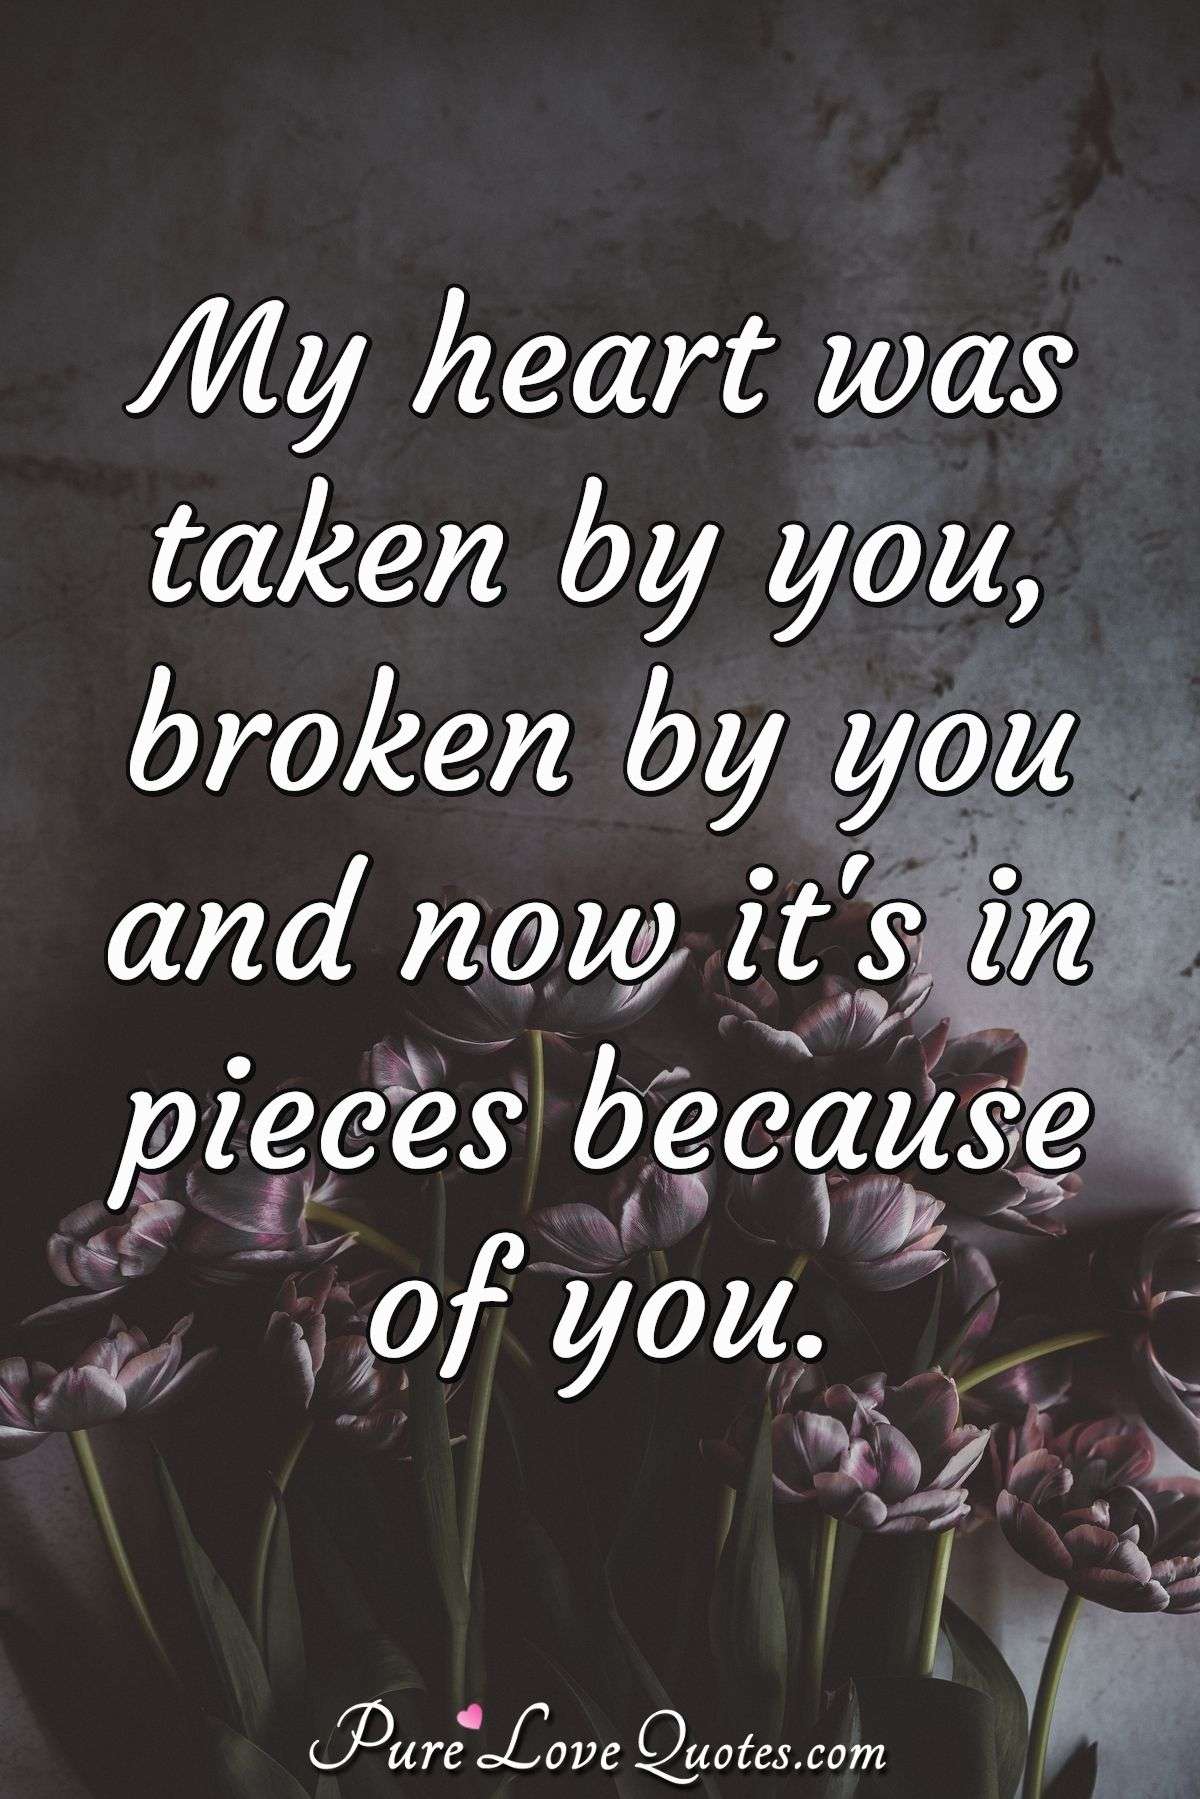 My heart was taken by you, broken by you and now it's in pieces because of you. - Anonymous